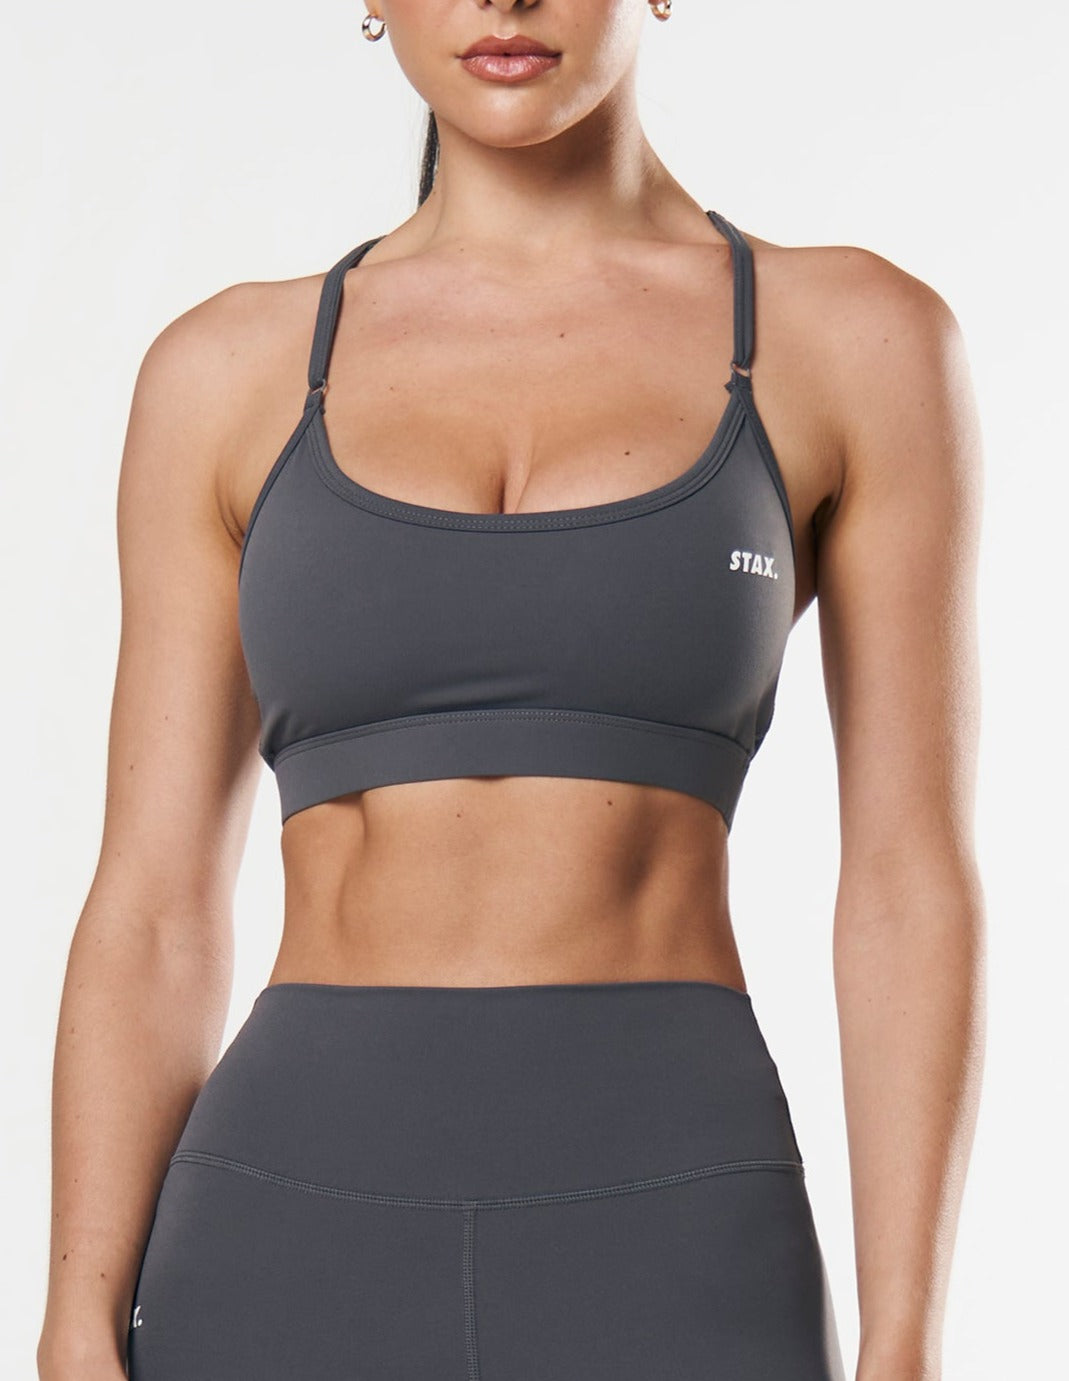 stax-strappy-crop-nandex-charcoal-grey